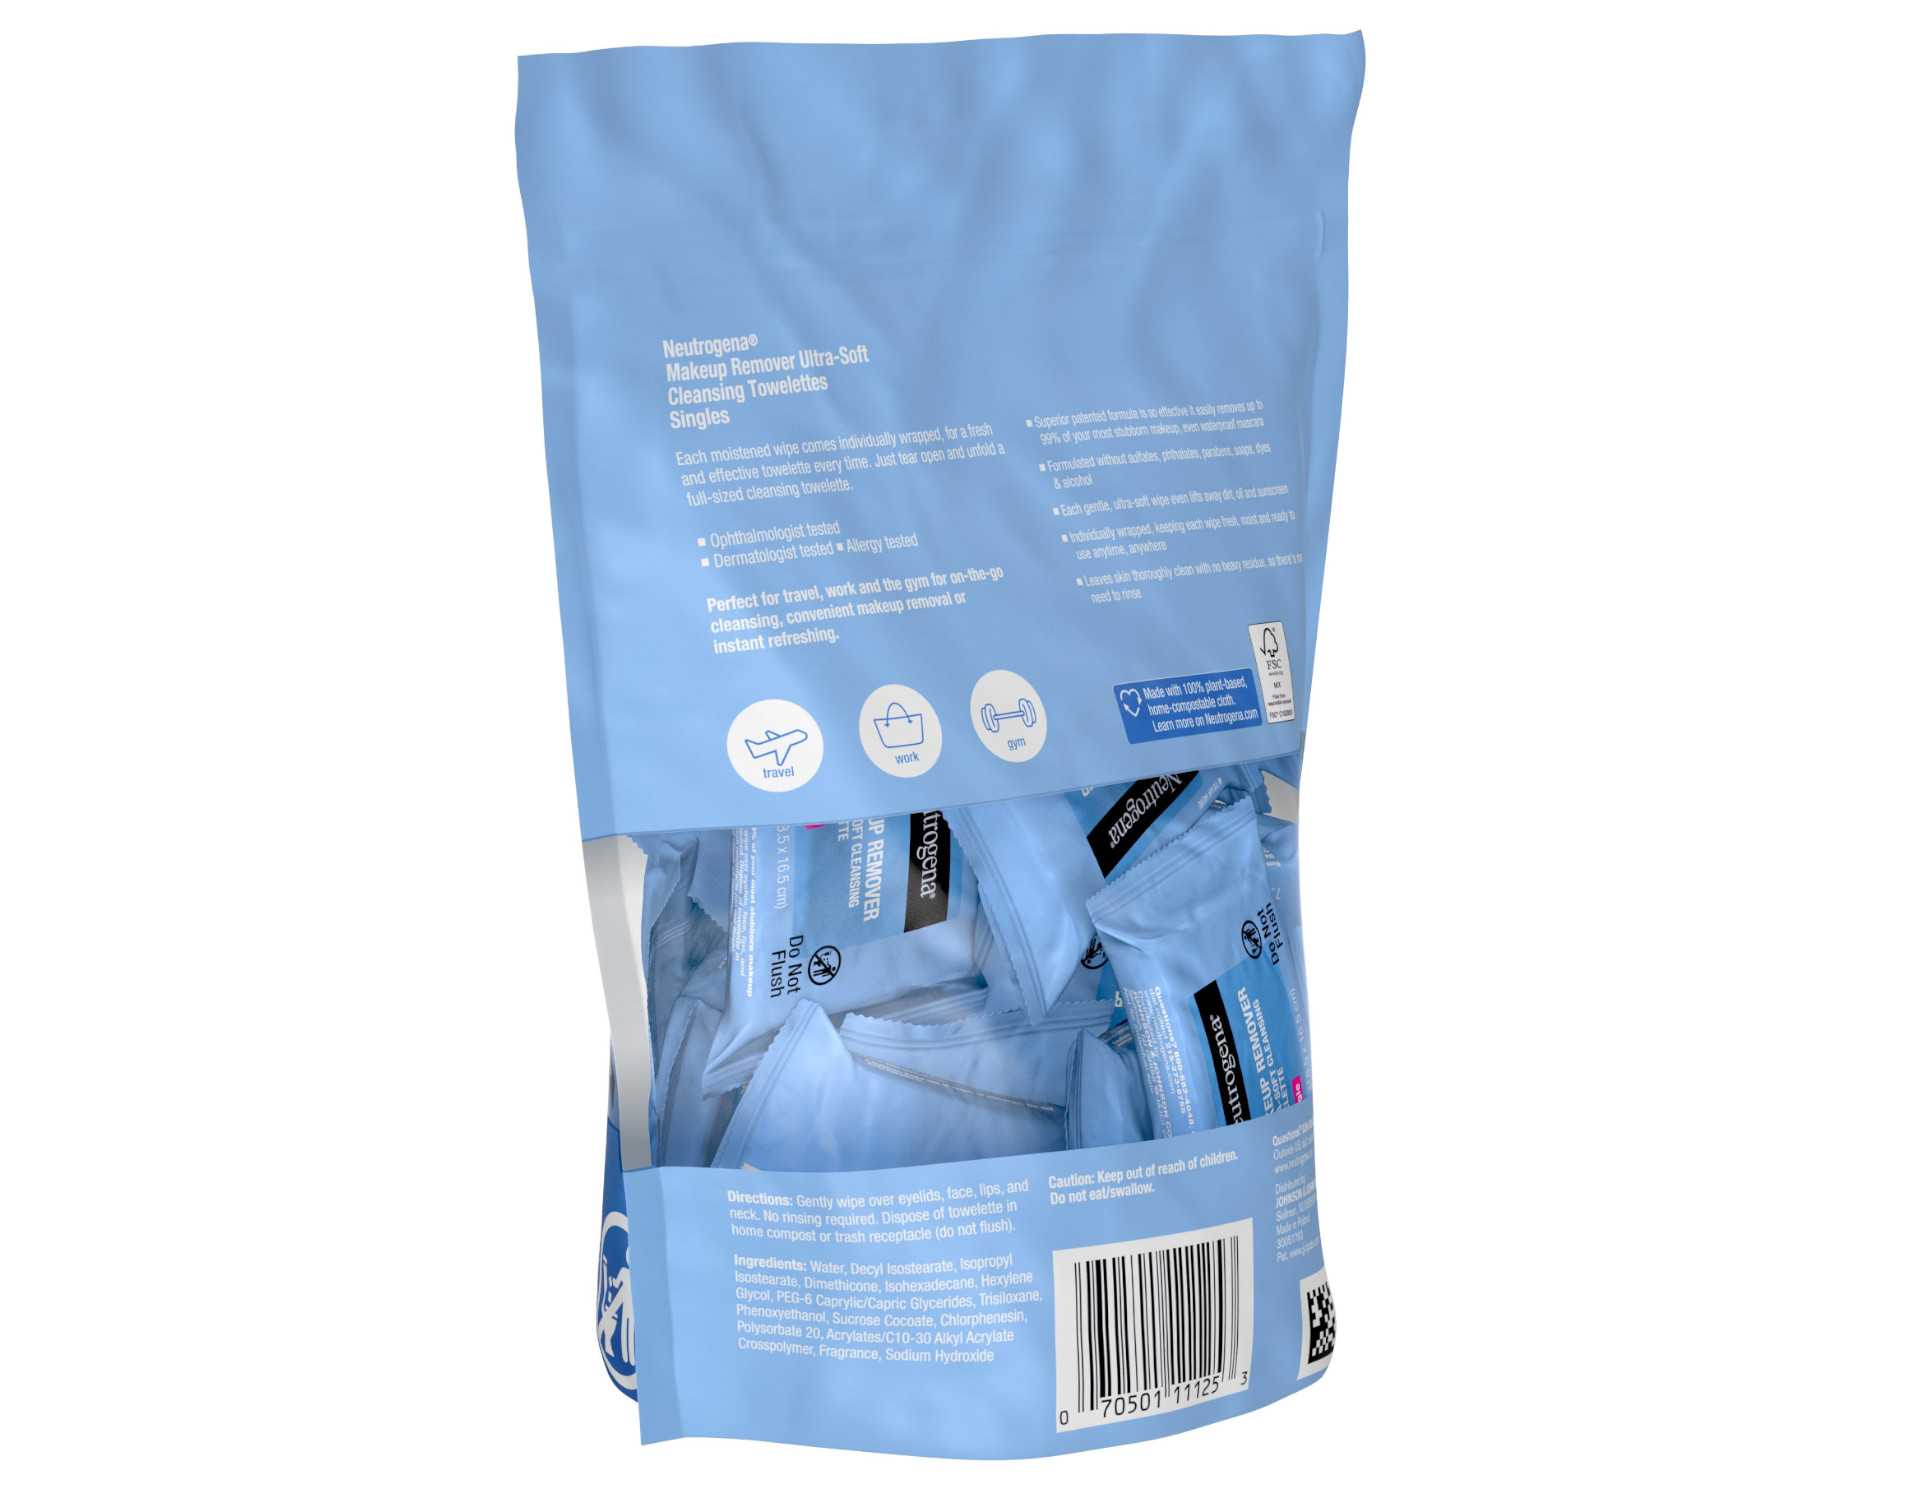 6 Pack Neutrogena Cleansing Facial Wipes, Individually Wrapped, 1 Bag of 20 Each - image 5 of 5